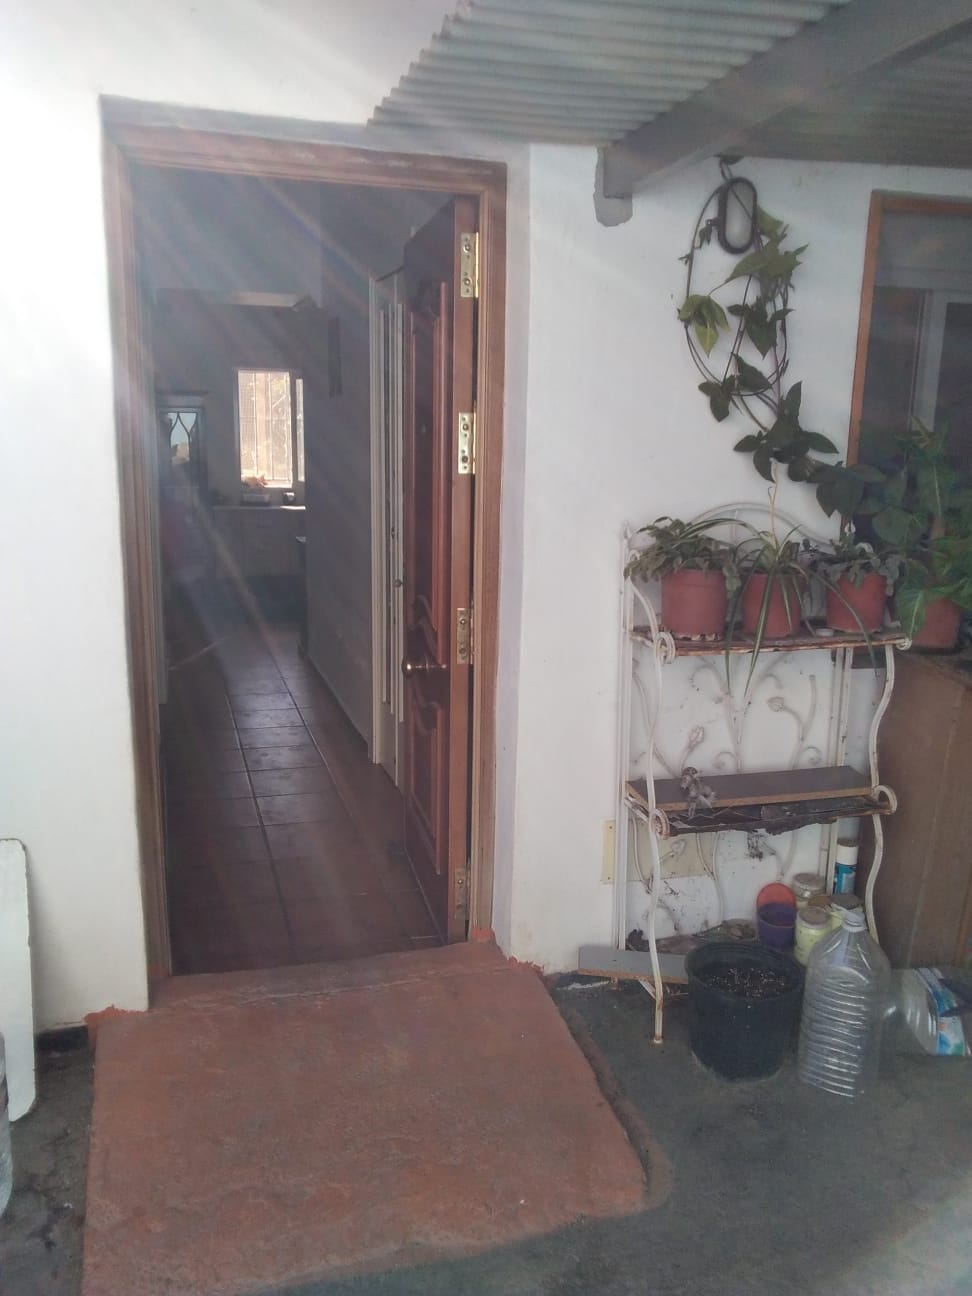 Renovated rustic house 2 km from the beach of Torrox Costa